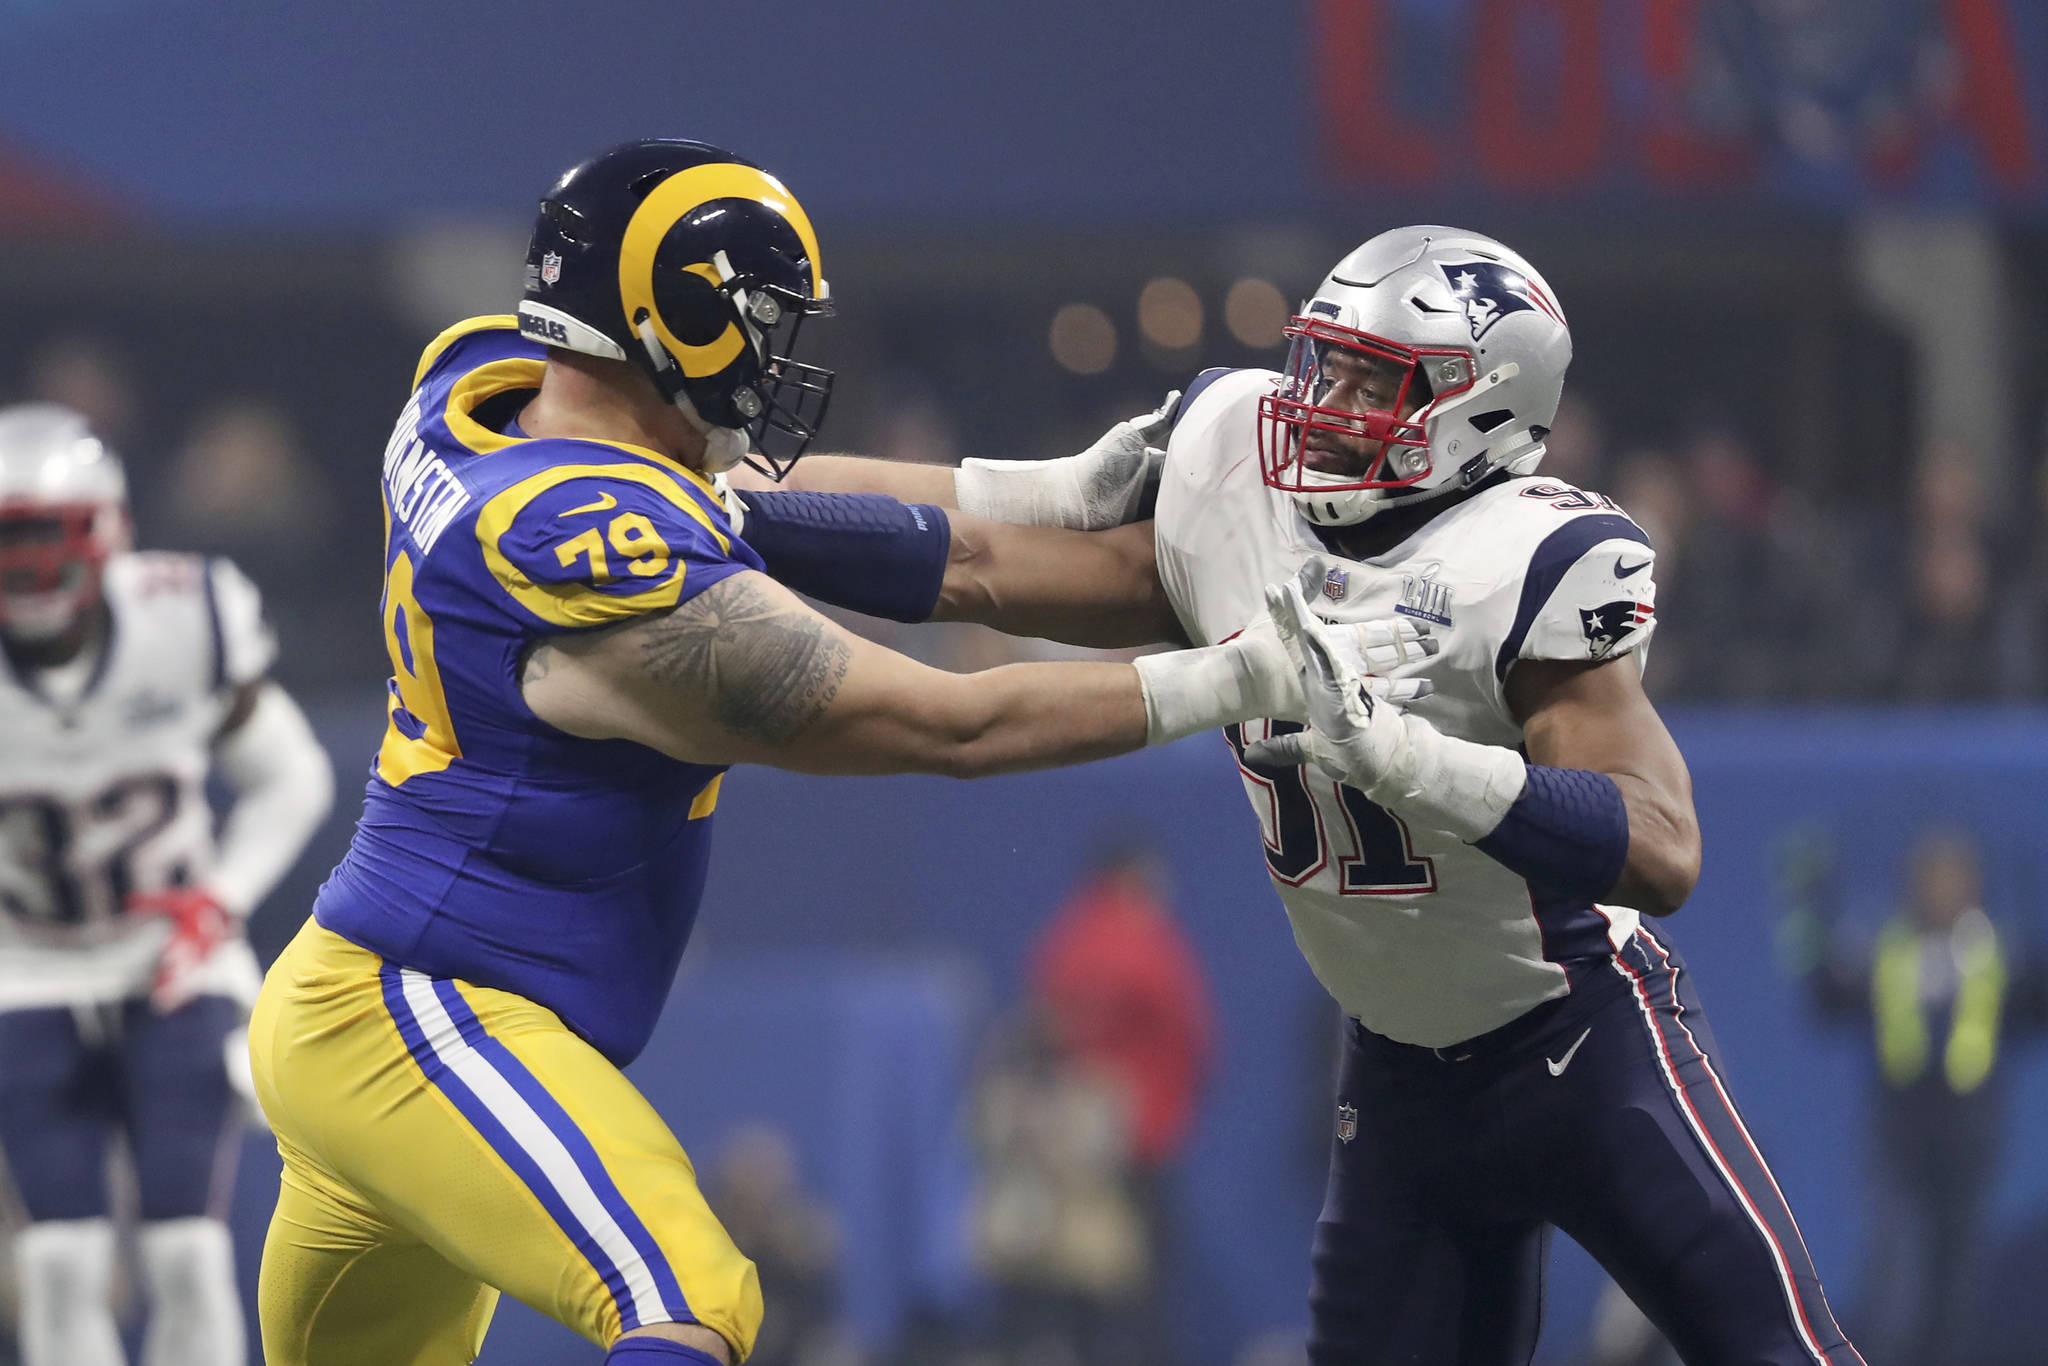 New England Patriots Deatrich Wise Jr. #91 in action against the Los Angeles Rams during NFL Super Bowl 53, Sunday, February 3, 2019 in Atlanta. The Patriots won 13-3. (AP Photo/Gregory Payan)